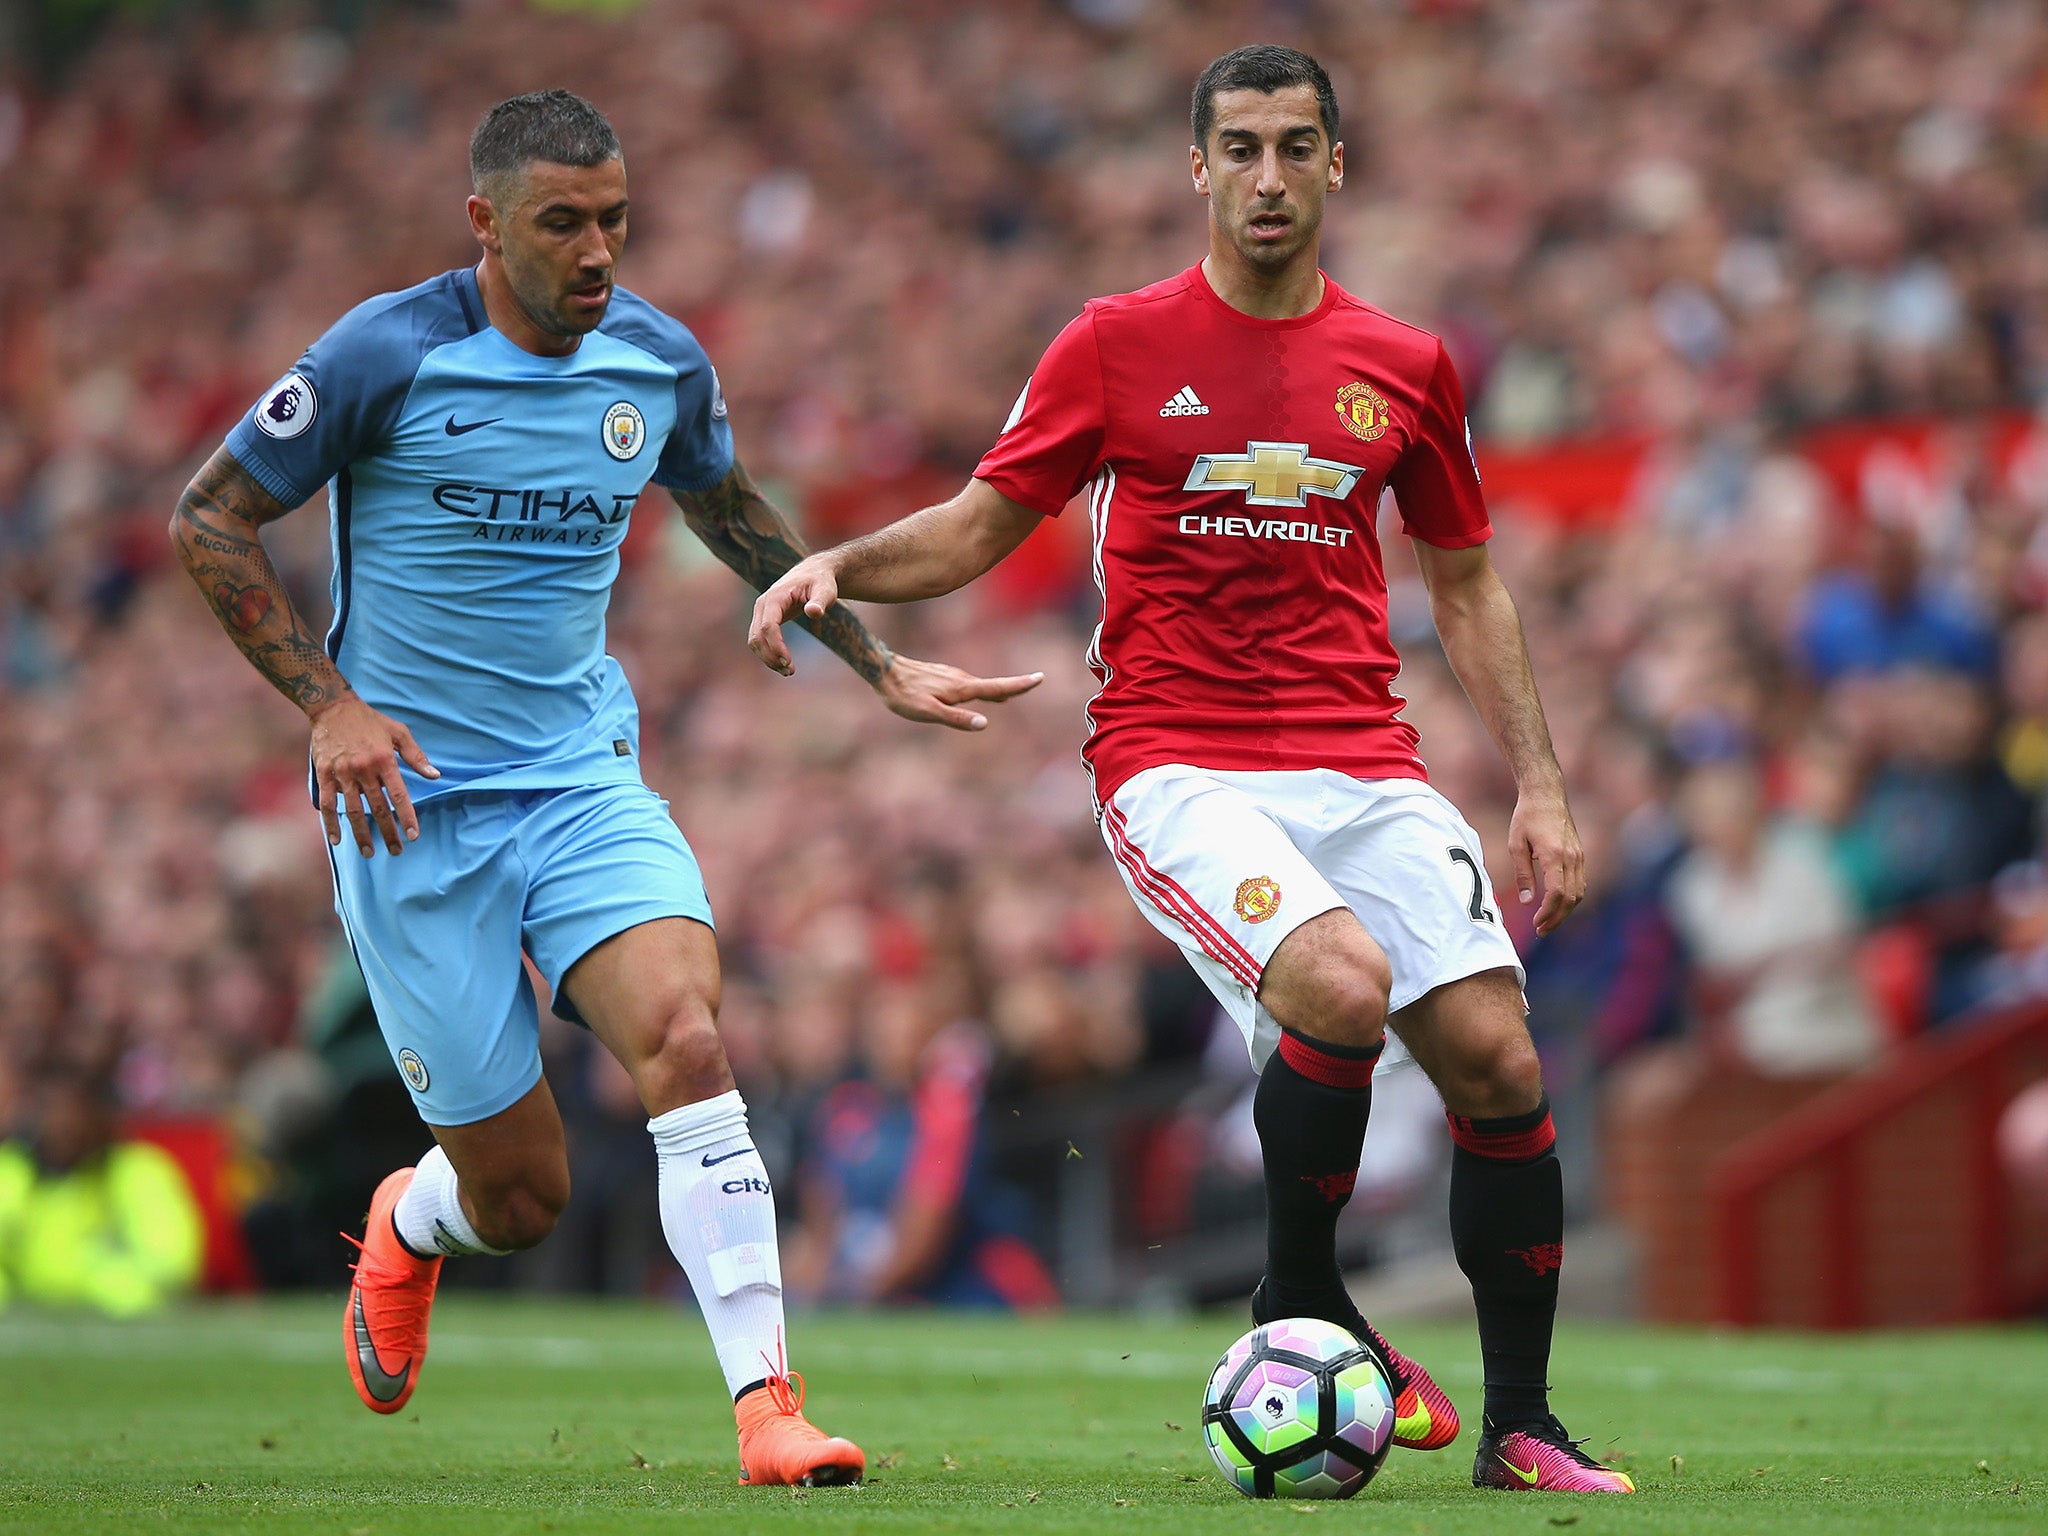 Henrikh Mkhitaryan has only played on the right for Manchester United so far